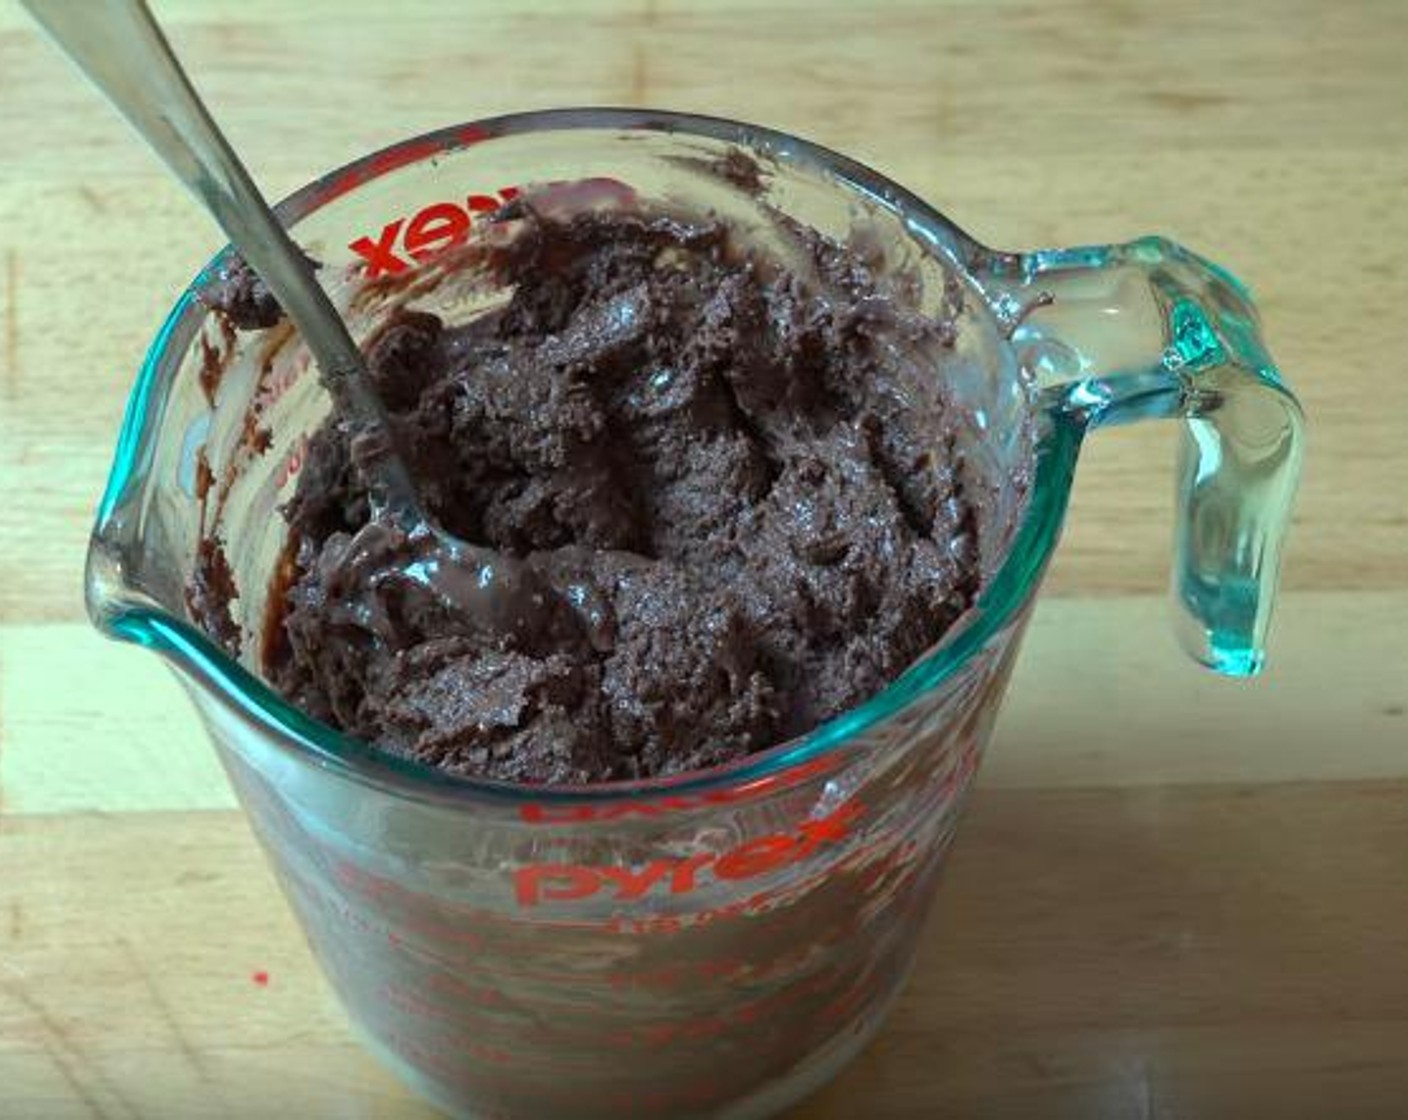 step 2 In a small bowl, combine Sweetened Condensed Milk (2/3 cup), Vanilla Extract (1 tsp), and Nutella® (1 cup). Gently mix together.